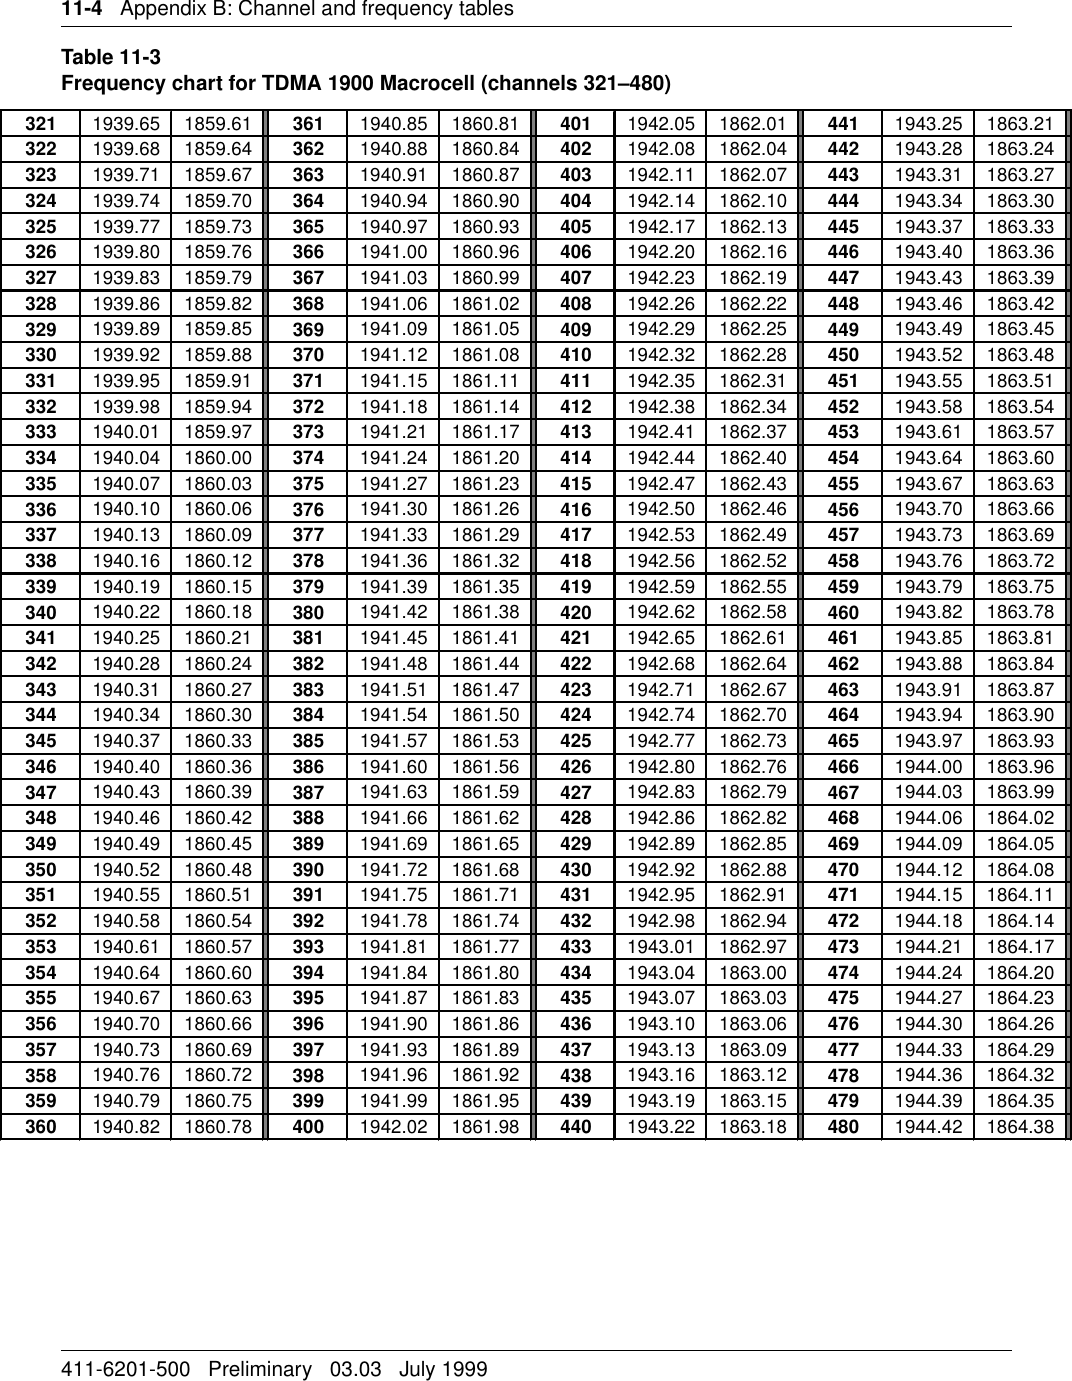 11-4   Appendix B: Channel and frequency tables411-6201-500   Preliminary   03.03   July 1999Table 11-3Frequency chart for TDMA 1900 Macrocell (channels 321–480)321 1939.65 1859.61 361 1940.85 1860.81 401 1942.05 1862.01 441 1943.25 1863.21322 1939.68 1859.64 362 1940.88 1860.84 402 1942.08 1862.04 442 1943.28 1863.24323 1939.71 1859.67 363 1940.91 1860.87 403 1942.11 1862.07 443 1943.31 1863.27324 1939.74 1859.70 364 1940.94 1860.90 404 1942.14 1862.10 444 1943.34 1863.30325 1939.77 1859.73 365 1940.97 1860.93 405 1942.17 1862.13 445 1943.37 1863.33326 1939.80 1859.76 366 1941.00 1860.96 406 1942.20 1862.16 446 1943.40 1863.36327 1939.83 1859.79 367 1941.03 1860.99 407 1942.23 1862.19 447 1943.43 1863.39328 1939.86 1859.82 368 1941.06 1861.02 408 1942.26 1862.22 448 1943.46 1863.42329 1939.89 1859.85 369 1941.09 1861.05 409 1942.29 1862.25 449 1943.49 1863.45330 1939.92 1859.88 370 1941.12 1861.08 410 1942.32 1862.28 450 1943.52 1863.48331 1939.95 1859.91 371 1941.15 1861.11 411 1942.35 1862.31 451 1943.55 1863.51332 1939.98 1859.94 372 1941.18 1861.14 412 1942.38 1862.34 452 1943.58 1863.54333 1940.01 1859.97 373 1941.21 1861.17 413 1942.41 1862.37 453 1943.61 1863.57334 1940.04 1860.00 374 1941.24 1861.20 414 1942.44 1862.40 454 1943.64 1863.60335 1940.07 1860.03 375 1941.27 1861.23 415 1942.47 1862.43 455 1943.67 1863.63336 1940.10 1860.06 376 1941.30 1861.26 416 1942.50 1862.46 456 1943.70 1863.66337 1940.13 1860.09 377 1941.33 1861.29 417 1942.53 1862.49 457 1943.73 1863.69338 1940.16 1860.12 378 1941.36 1861.32 418 1942.56 1862.52 458 1943.76 1863.72339 1940.19 1860.15 379 1941.39 1861.35 419 1942.59 1862.55 459 1943.79 1863.75340 1940.22 1860.18 380 1941.42 1861.38 420 1942.62 1862.58 460 1943.82 1863.78341 1940.25 1860.21 381 1941.45 1861.41 421 1942.65 1862.61 461 1943.85 1863.81342 1940.28 1860.24 382 1941.48 1861.44 422 1942.68 1862.64 462 1943.88 1863.84343 1940.31 1860.27 383 1941.51 1861.47 423 1942.71 1862.67 463 1943.91 1863.87344 1940.34 1860.30 384 1941.54 1861.50 424 1942.74 1862.70 464 1943.94 1863.90345 1940.37 1860.33 385 1941.57 1861.53 425 1942.77 1862.73 465 1943.97 1863.93346 1940.40 1860.36 386 1941.60 1861.56 426 1942.80 1862.76 466 1944.00 1863.96347 1940.43 1860.39 387 1941.63 1861.59 427 1942.83 1862.79 467 1944.03 1863.99348 1940.46 1860.42 388 1941.66 1861.62 428 1942.86 1862.82 468 1944.06 1864.02349 1940.49 1860.45 389 1941.69 1861.65 429 1942.89 1862.85 469 1944.09 1864.05350 1940.52 1860.48 390 1941.72 1861.68 430 1942.92 1862.88 470 1944.12 1864.08351 1940.55 1860.51 391 1941.75 1861.71 431 1942.95 1862.91 471 1944.15 1864.11352 1940.58 1860.54 392 1941.78 1861.74 432 1942.98 1862.94 472 1944.18 1864.14353 1940.61 1860.57 393 1941.81 1861.77 433 1943.01 1862.97 473 1944.21 1864.17354 1940.64 1860.60 394 1941.84 1861.80 434 1943.04 1863.00 474 1944.24 1864.20355 1940.67 1860.63 395 1941.87 1861.83 435 1943.07 1863.03 475 1944.27 1864.23356 1940.70 1860.66 396 1941.90 1861.86 436 1943.10 1863.06 476 1944.30 1864.26357 1940.73 1860.69 397 1941.93 1861.89 437 1943.13 1863.09 477 1944.33 1864.29358 1940.76 1860.72 398 1941.96 1861.92 438 1943.16 1863.12 478 1944.36 1864.32359 1940.79 1860.75 399 1941.99 1861.95 439 1943.19 1863.15 479 1944.39 1864.35360 1940.82 1860.78 400 1942.02 1861.98 440 1943.22 1863.18 480 1944.42 1864.38